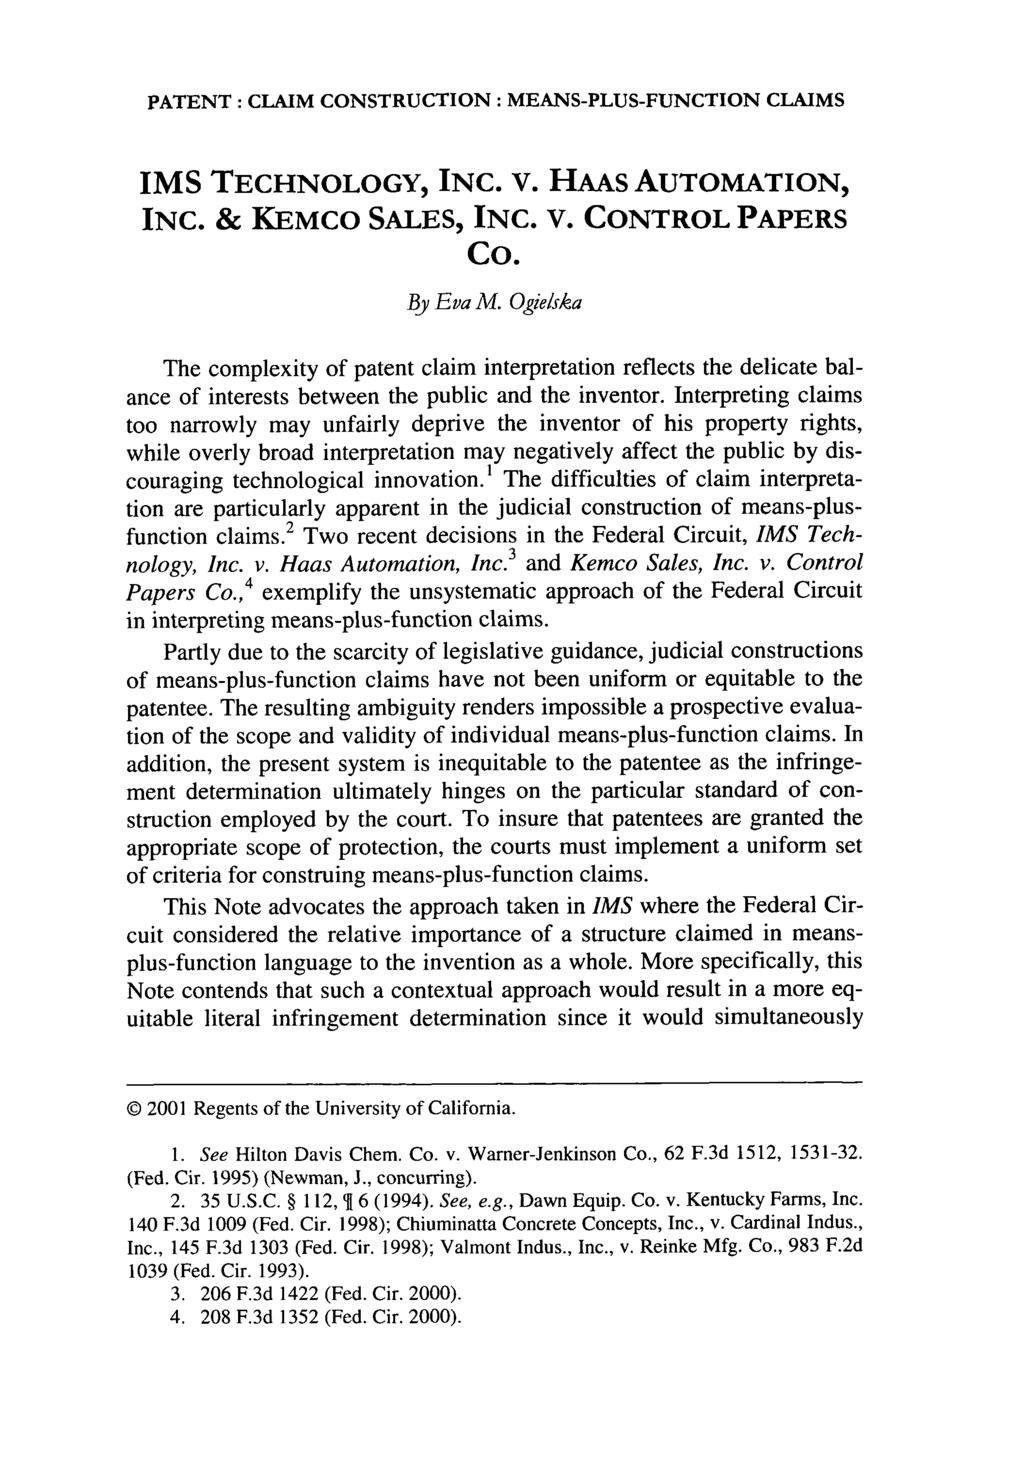 PATENT: CLAIM CONSTRUCTION: MEANS-PLUS-FUNCTION CLAIMS IMS TECHNOLOGY, INC. V. HAAS AUTOMATION, INC. & KEMCO SALES, INC. V. CONTROL PAPERS Co. By Eva M.